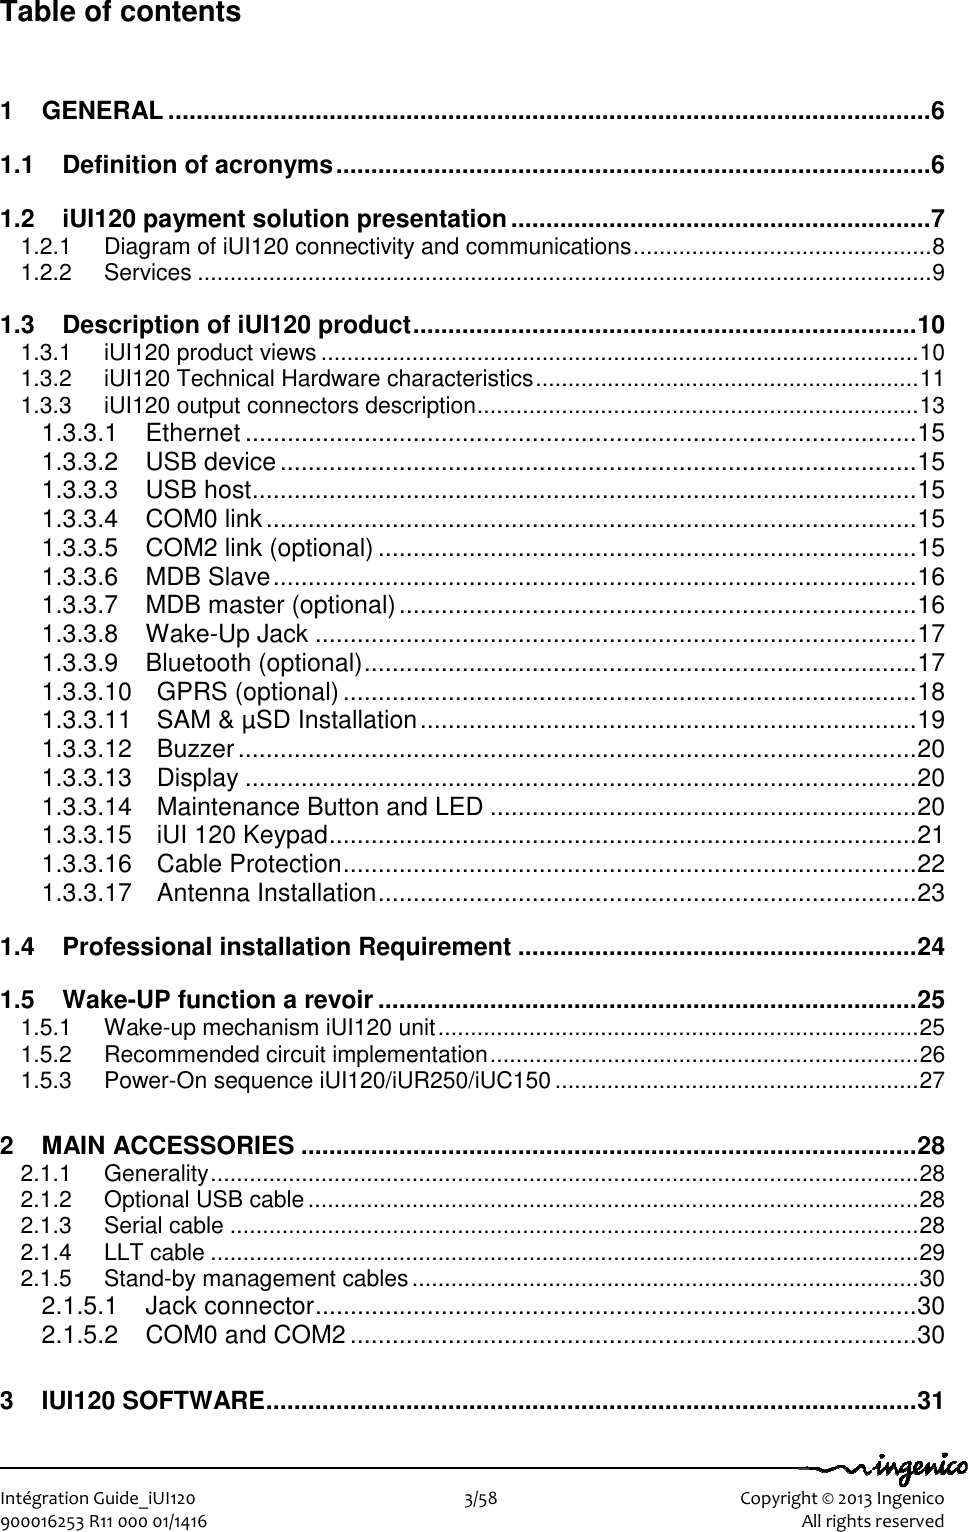   Intégration Guide_iUI120                        3/58    Copyright © 2013 Ingenico 900016253 R11 000 01/1416    All rights reserved Table of contents 1 GENERAL ............................................................................................................. 6 1.1 Definition of acronyms ..................................................................................... 6 1.2 iUI120 payment solution presentation ............................................................ 7 1.2.1 Diagram of iUI120 connectivity and communications .............................................. 8 1.2.2 Services ................................................................................................................. 9 1.3 Description of iUI120 product ........................................................................ 10 1.3.1 iUI120 product views ............................................................................................ 10 1.3.2 iUI120 Technical Hardware characteristics ........................................................... 11 1.3.3 iUI120 output connectors description .................................................................... 13 1.3.3.1 Ethernet ................................................................................................ 15 1.3.3.2 USB device ........................................................................................... 15 1.3.3.3 USB host ............................................................................................... 15 1.3.3.4 COM0 link ............................................................................................. 15 1.3.3.5 COM2 link (optional) ............................................................................. 15 1.3.3.6 MDB Slave ............................................................................................ 16 1.3.3.7 MDB master (optional) .......................................................................... 16 1.3.3.8 Wake-Up Jack ...................................................................................... 17 1.3.3.9 Bluetooth (optional) ............................................................................... 17 1.3.3.10 GPRS (optional) .................................................................................. 18 1.3.3.11 SAM &amp; µSD Installation ....................................................................... 19 1.3.3.12 Buzzer ................................................................................................. 20 1.3.3.13 Display ................................................................................................ 20 1.3.3.14 Maintenance Button and LED ............................................................. 20 1.3.3.15 iUI 120 Keypad .................................................................................... 21 1.3.3.16 Cable Protection .................................................................................. 22 1.3.3.17 Antenna Installation ............................................................................. 23 1.4 Professional installation Requirement ......................................................... 24 1.5 Wake-UP function a revoir ............................................................................. 25 1.5.1 Wake-up mechanism iUI120 unit .......................................................................... 25 1.5.2 Recommended circuit implementation .................................................................. 26 1.5.3 Power-On sequence iUI120/iUR250/iUC150 ........................................................ 27 2 MAIN ACCESSORIES ........................................................................................ 28 2.1.1 Generality ............................................................................................................. 28 2.1.2 Optional USB cable .............................................................................................. 28 2.1.3 Serial cable .......................................................................................................... 28 2.1.4 LLT cable ............................................................................................................. 29 2.1.5 Stand-by management cables .............................................................................. 30 2.1.5.1 Jack connector ...................................................................................... 30 2.1.5.2 COM0 and COM2 ................................................................................. 30 3 IUI120 SOFTWARE ............................................................................................. 31 